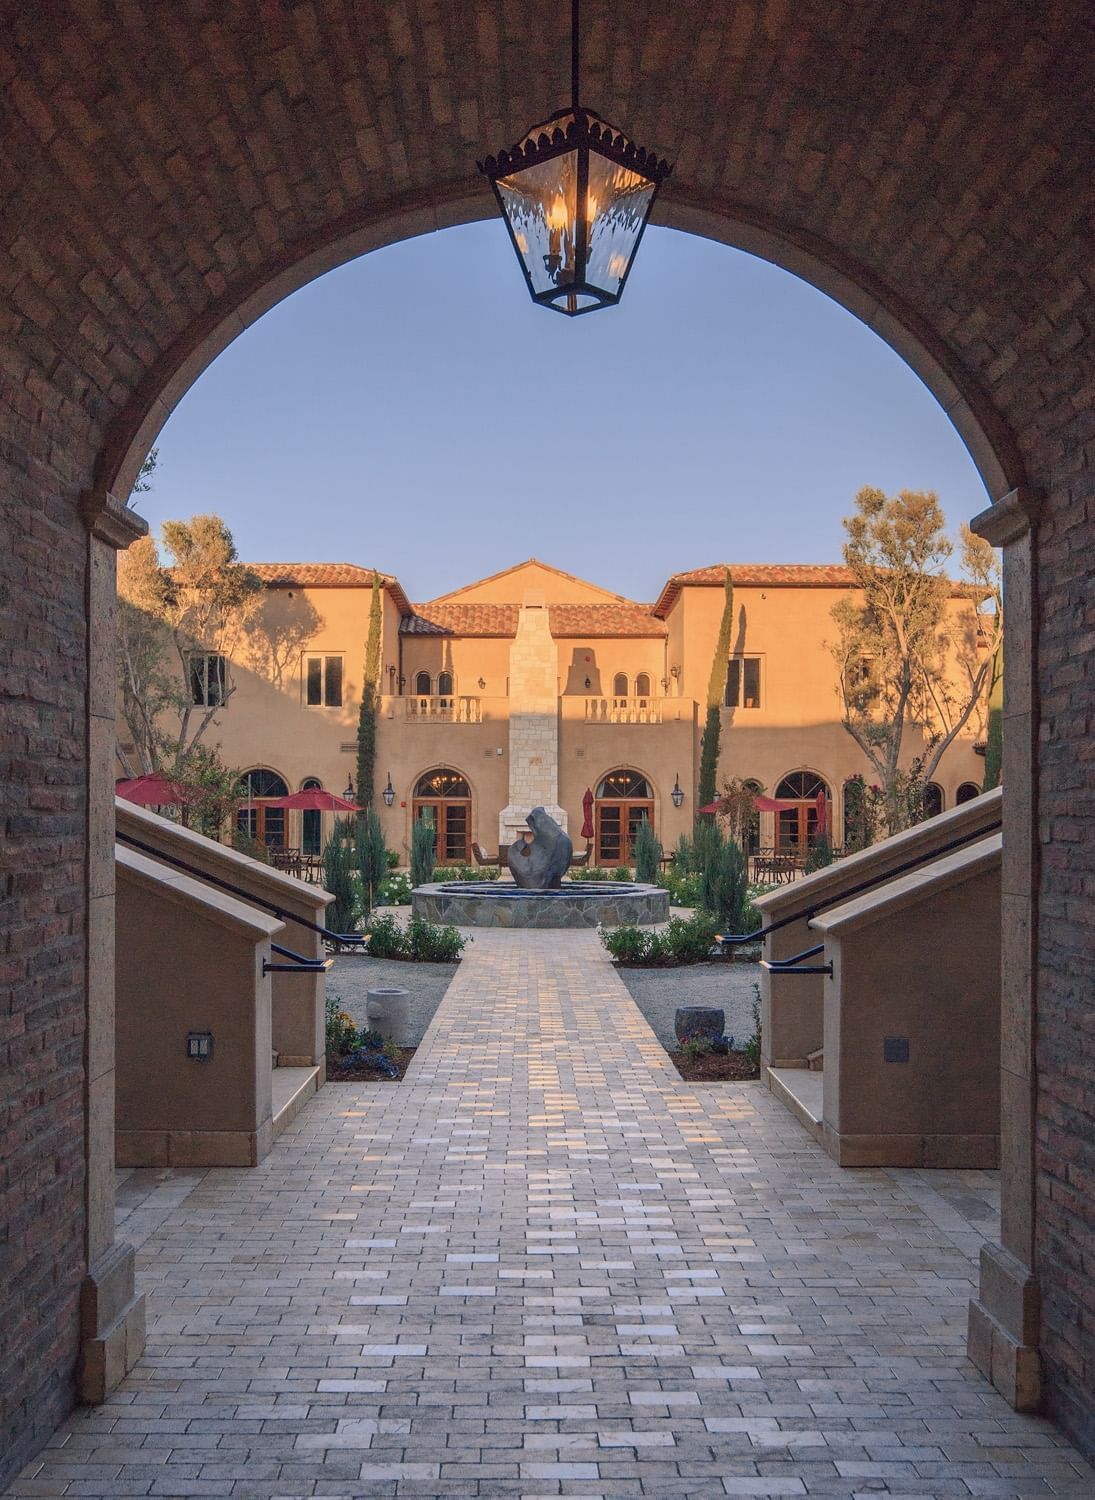 Looking through an archway into the resort's courtyard